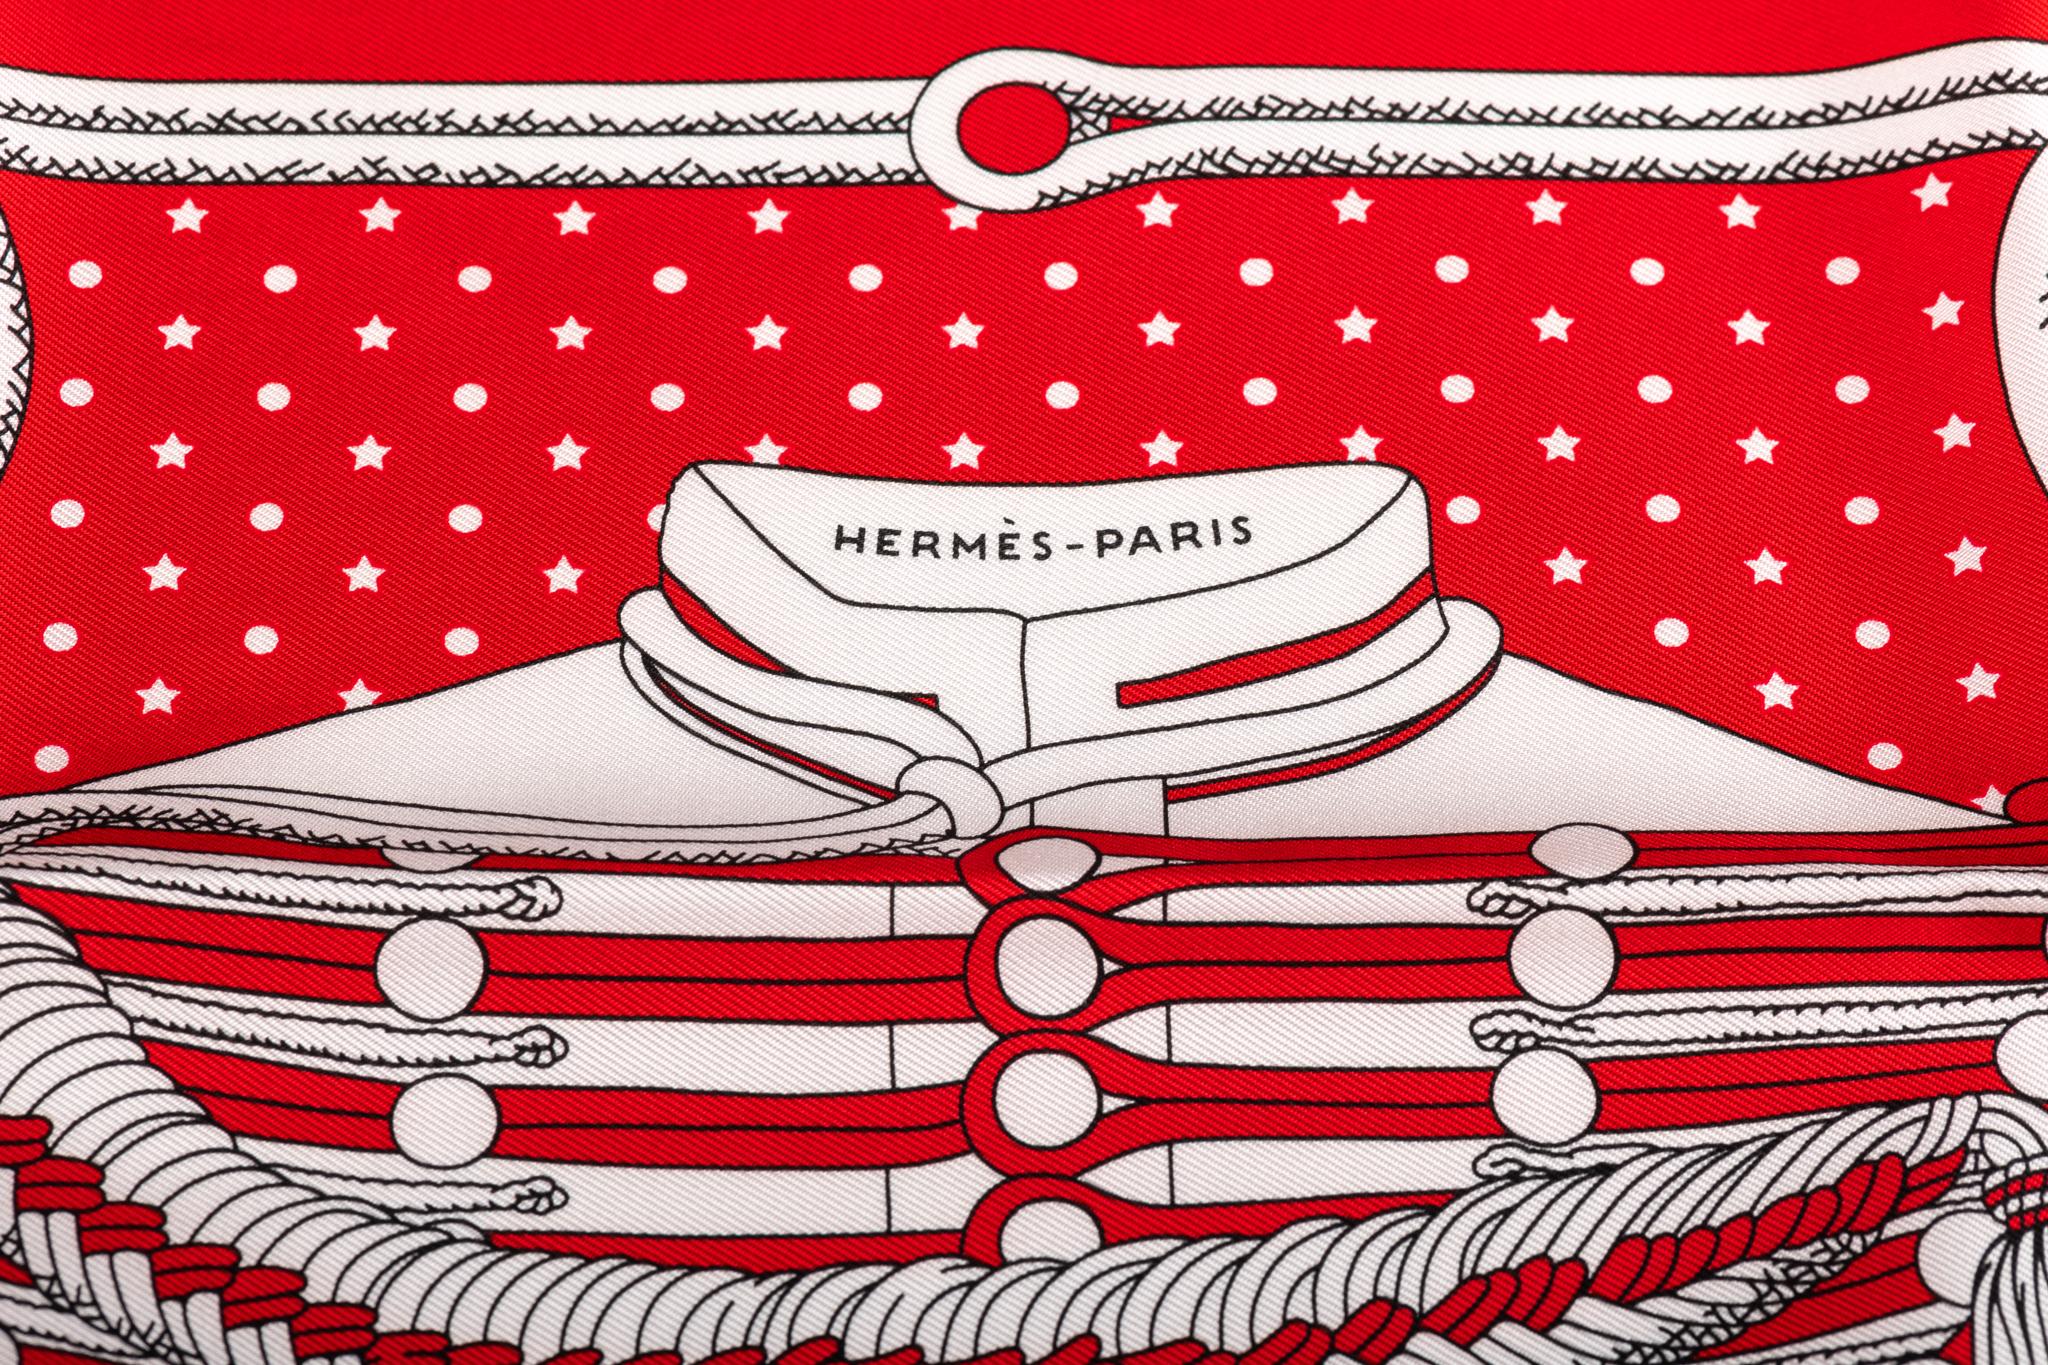 Hermes red and white limited edition Brandebourg bandana silk scarf. 55 cm. Brand new in box.